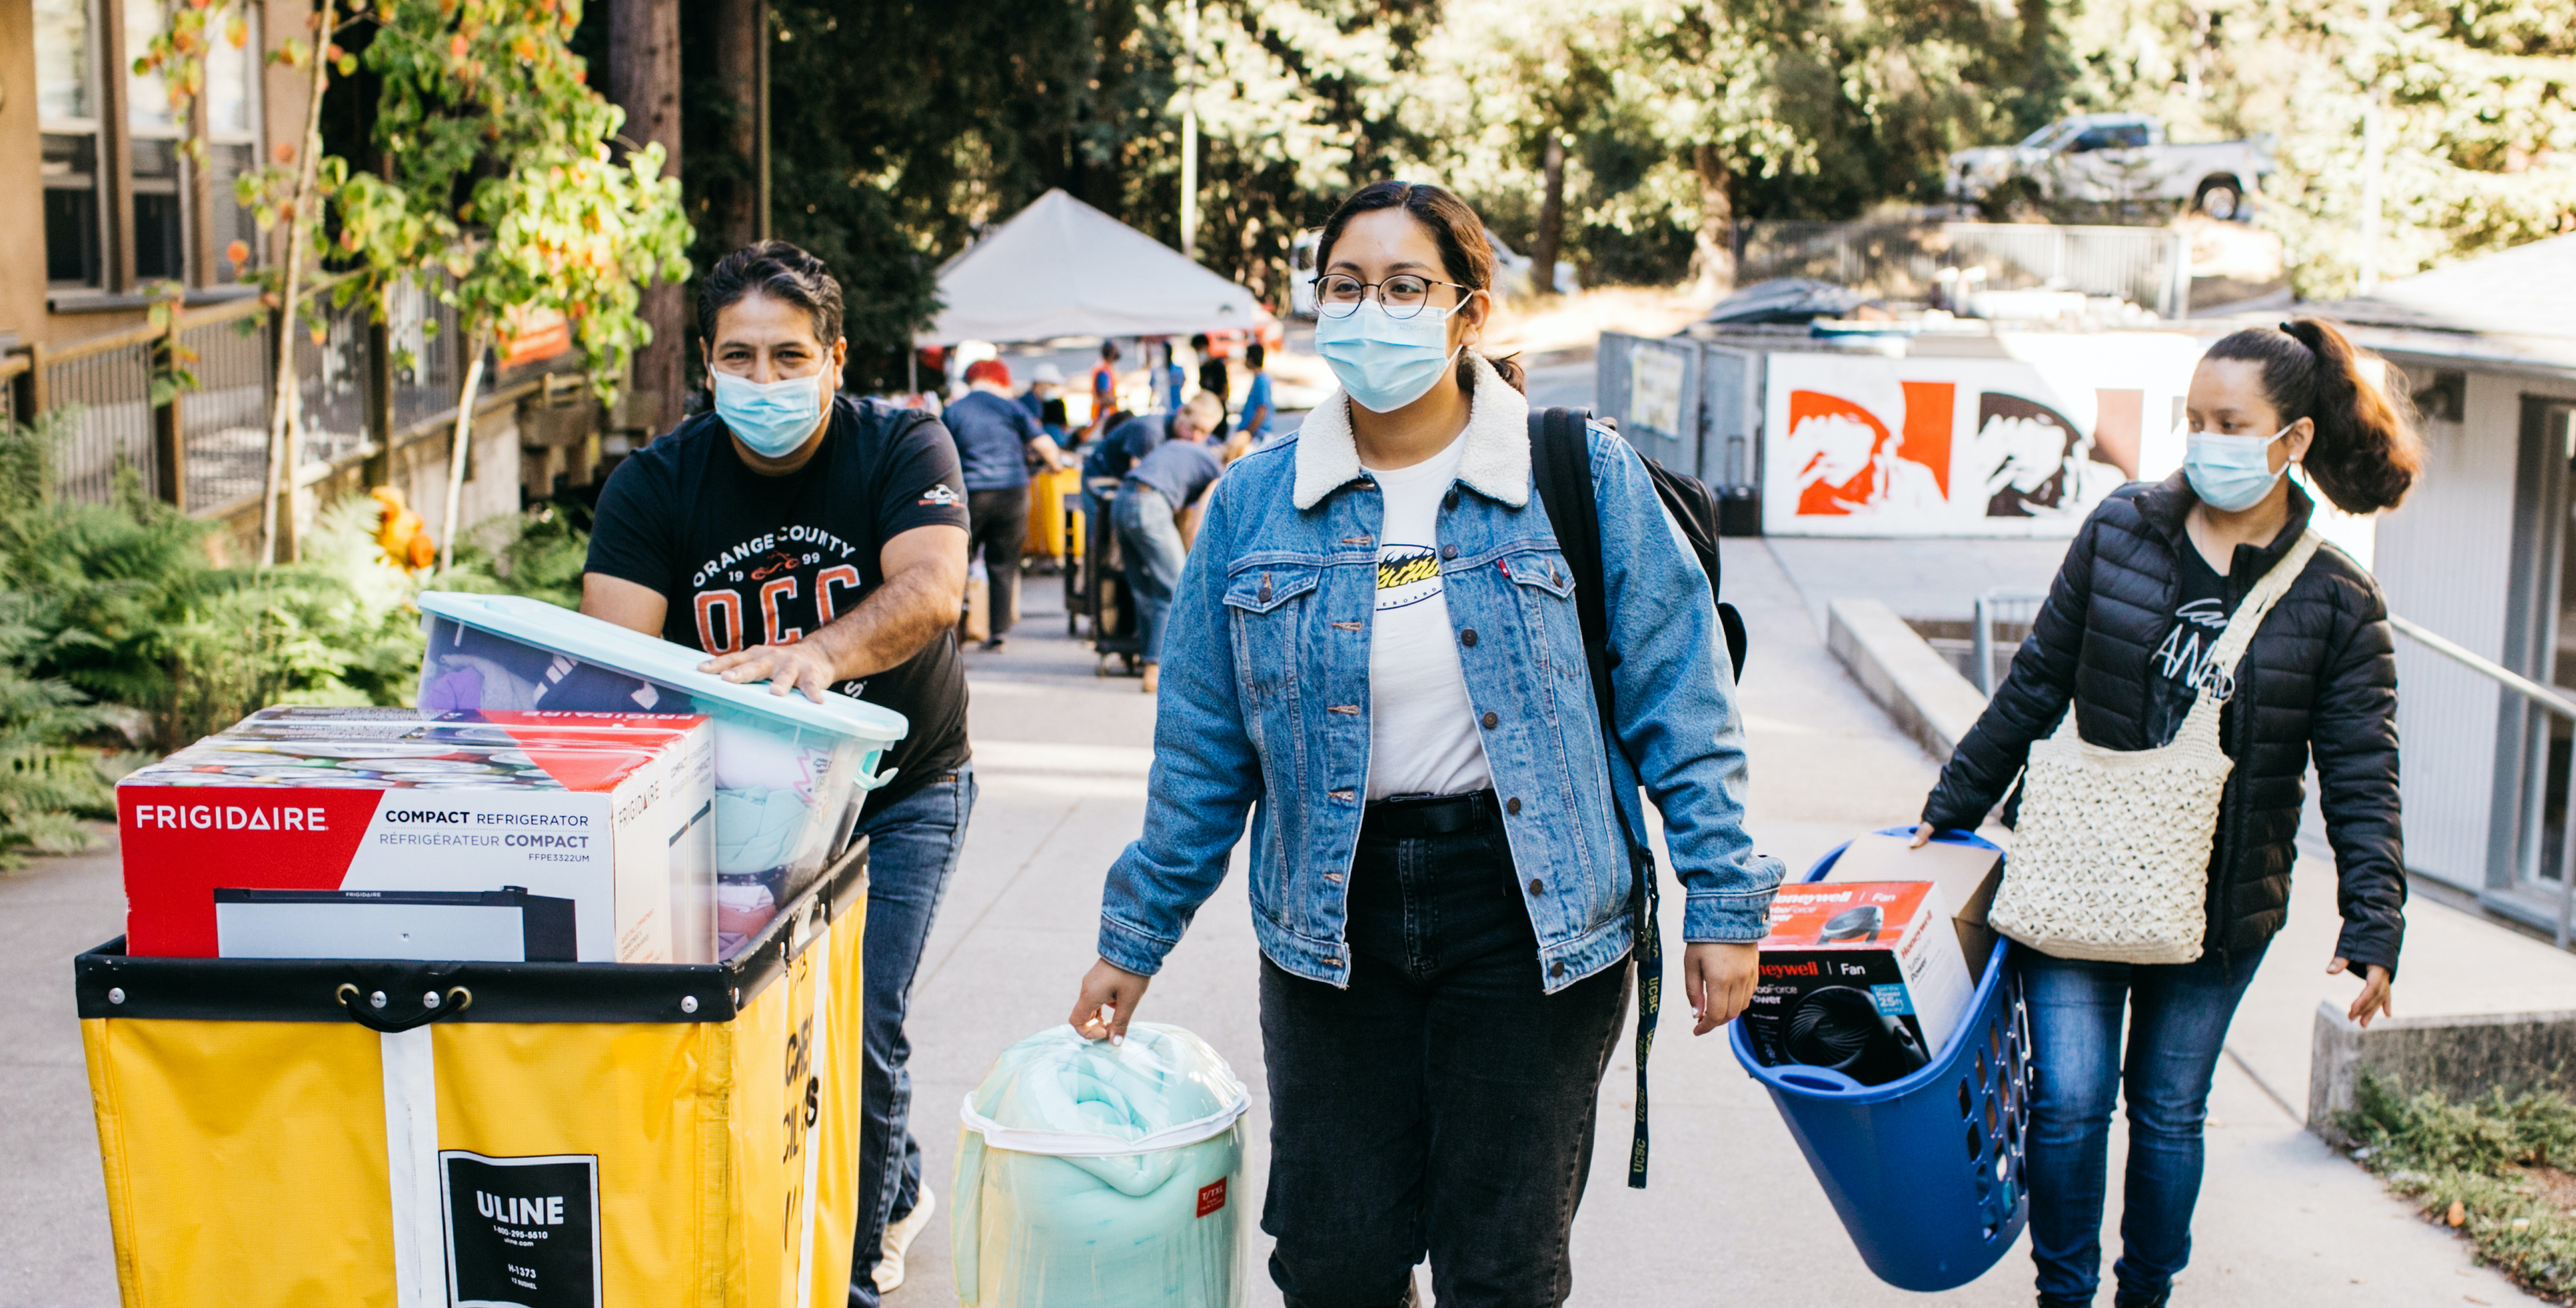 A family of three walks towards the camera. All three are wearing blue medical masks and are carrying a variety of belongings. The person on the left is pushing a yellow cart.